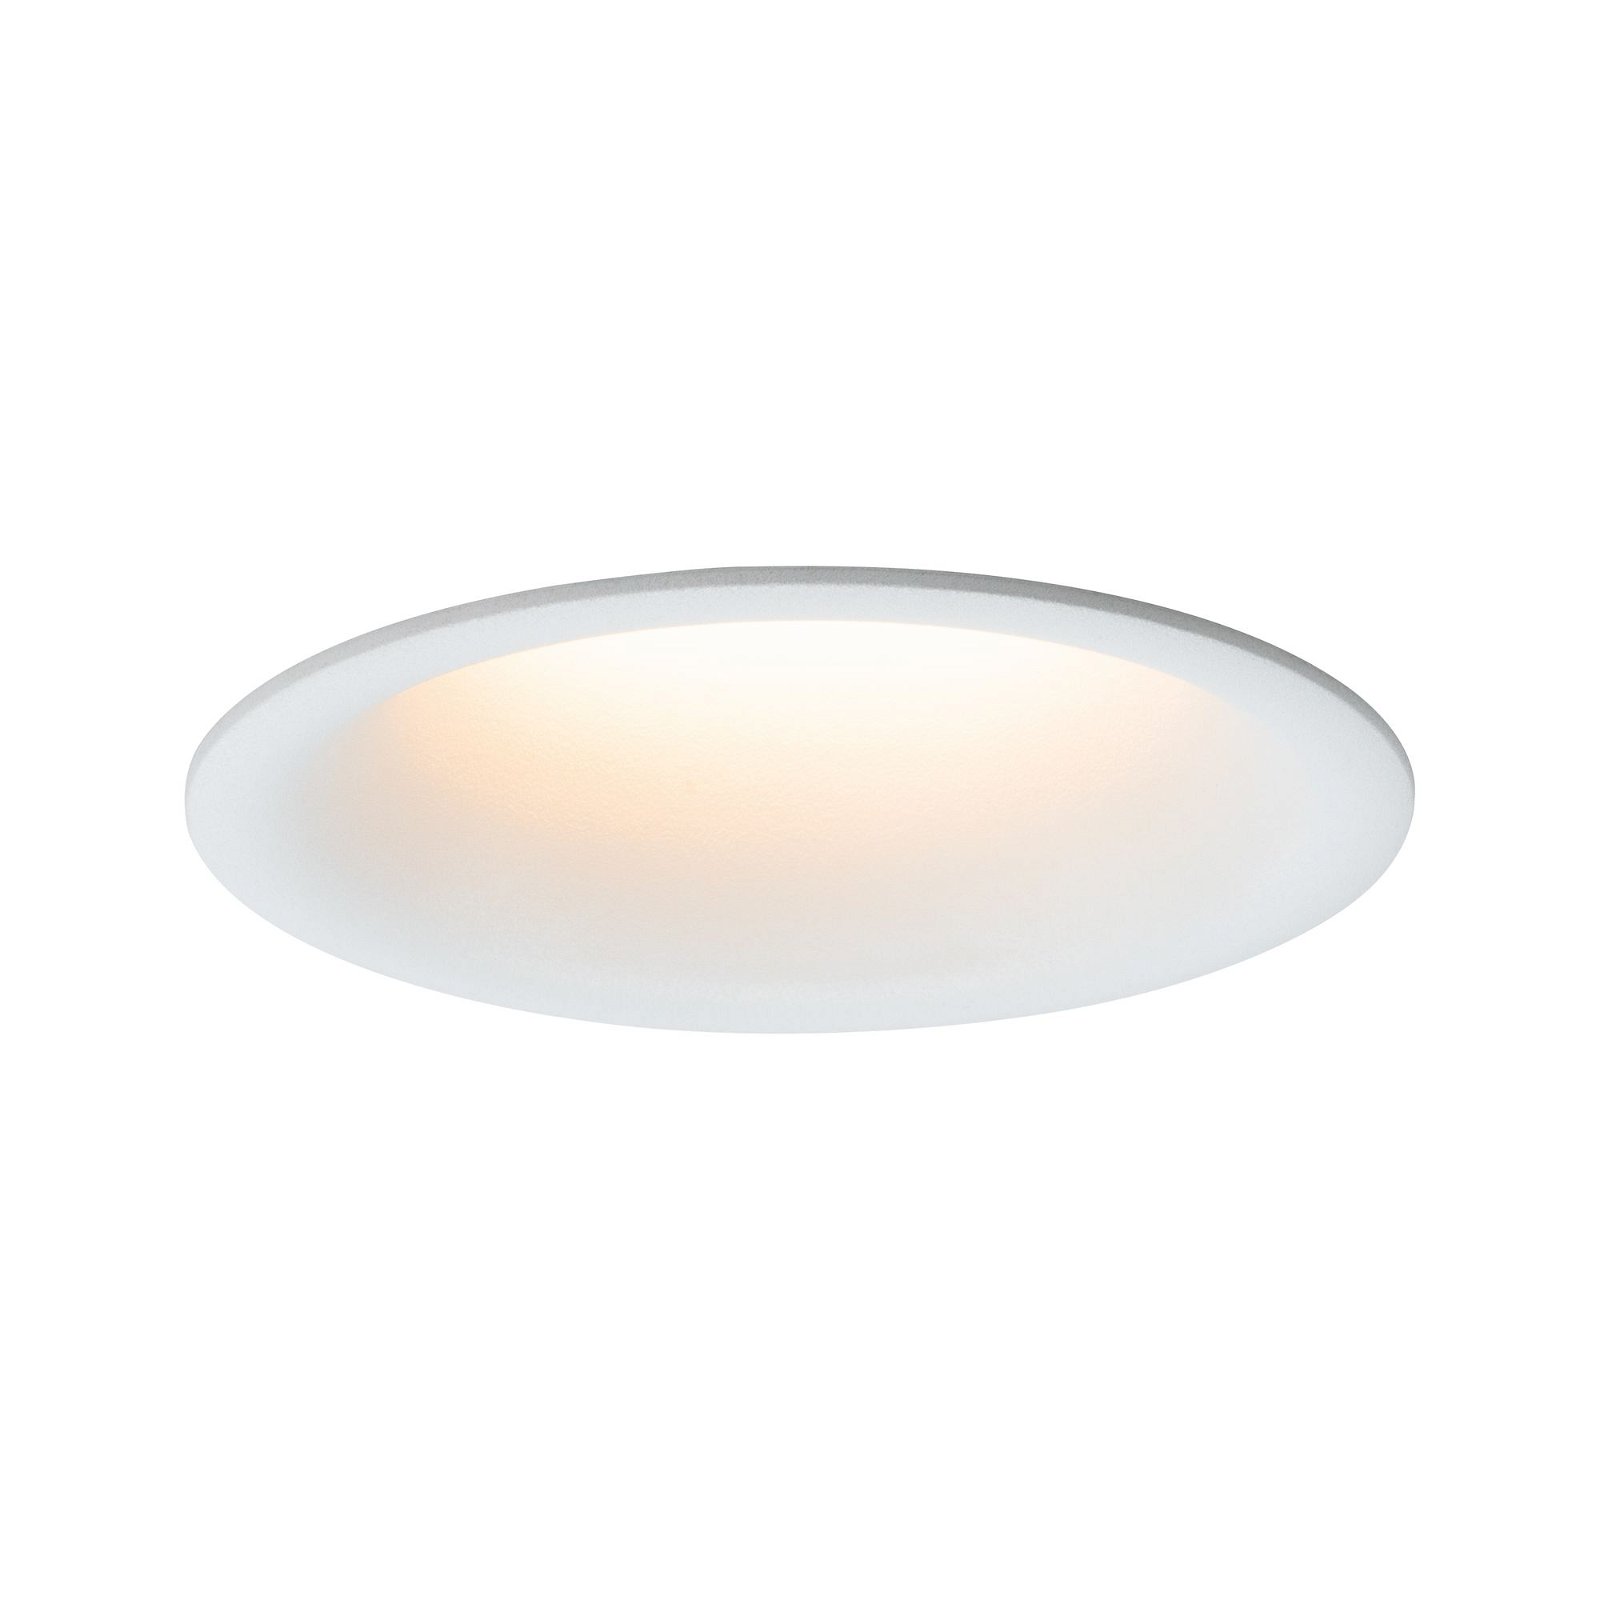 LED Recessed luminaire Cymbal Coin IP44 round 77mm Coin 6W 440lm 230V dimmable Dim to warm Matt white